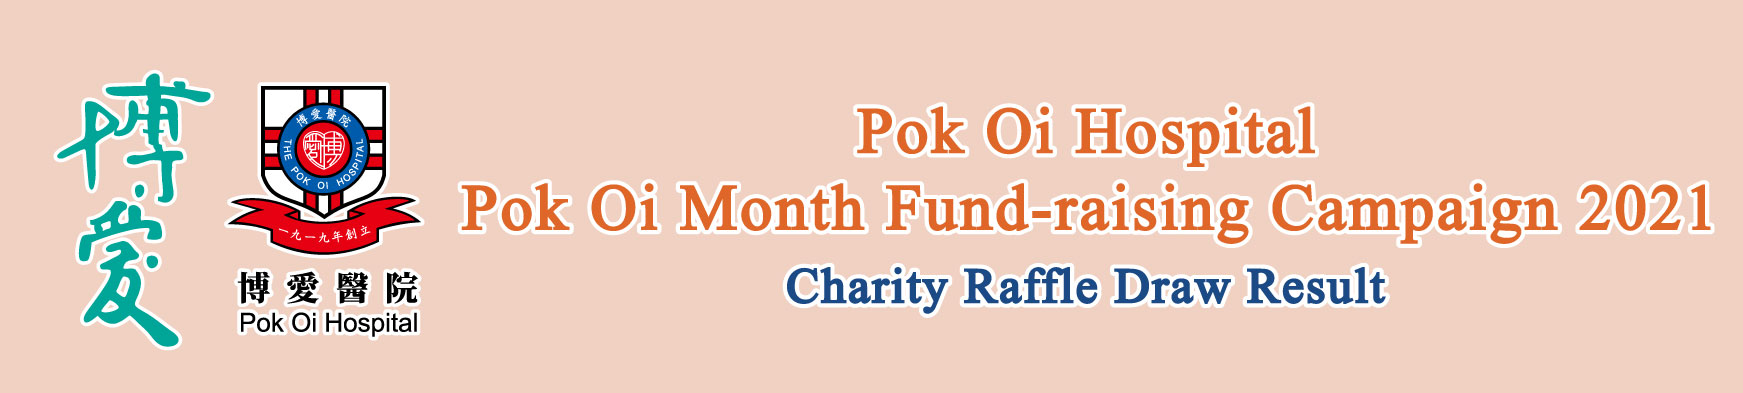 Pok Oi Month Fund-raising Campaign 2021 Charity Raffle Draw Result